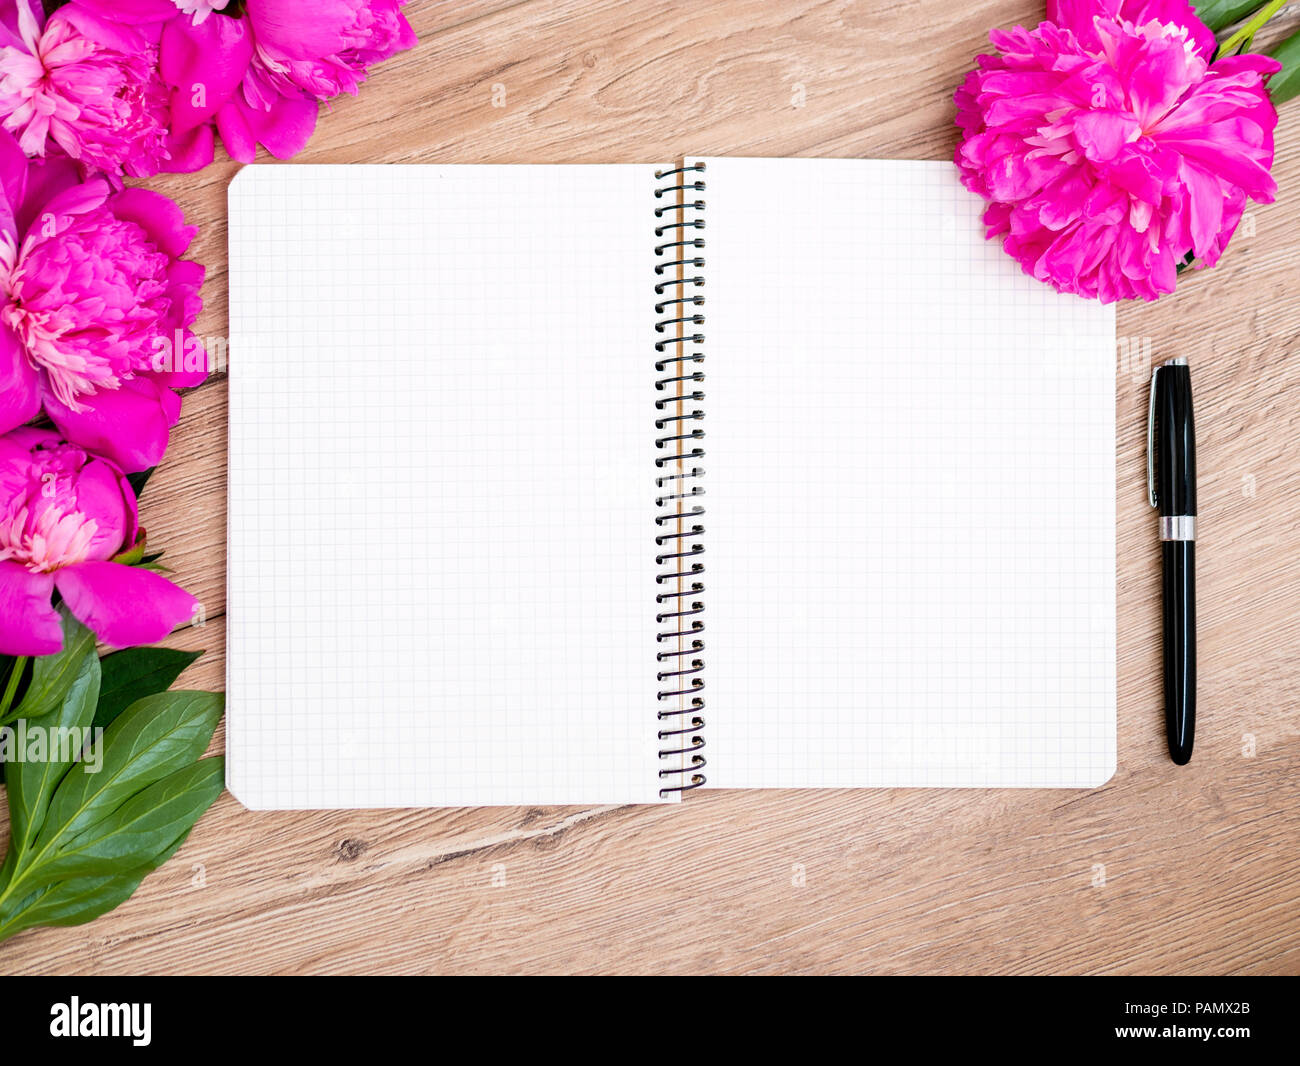 Pink floral assorted pink flower on wooden background with notepad free space, copy space for tekst Stock Photo